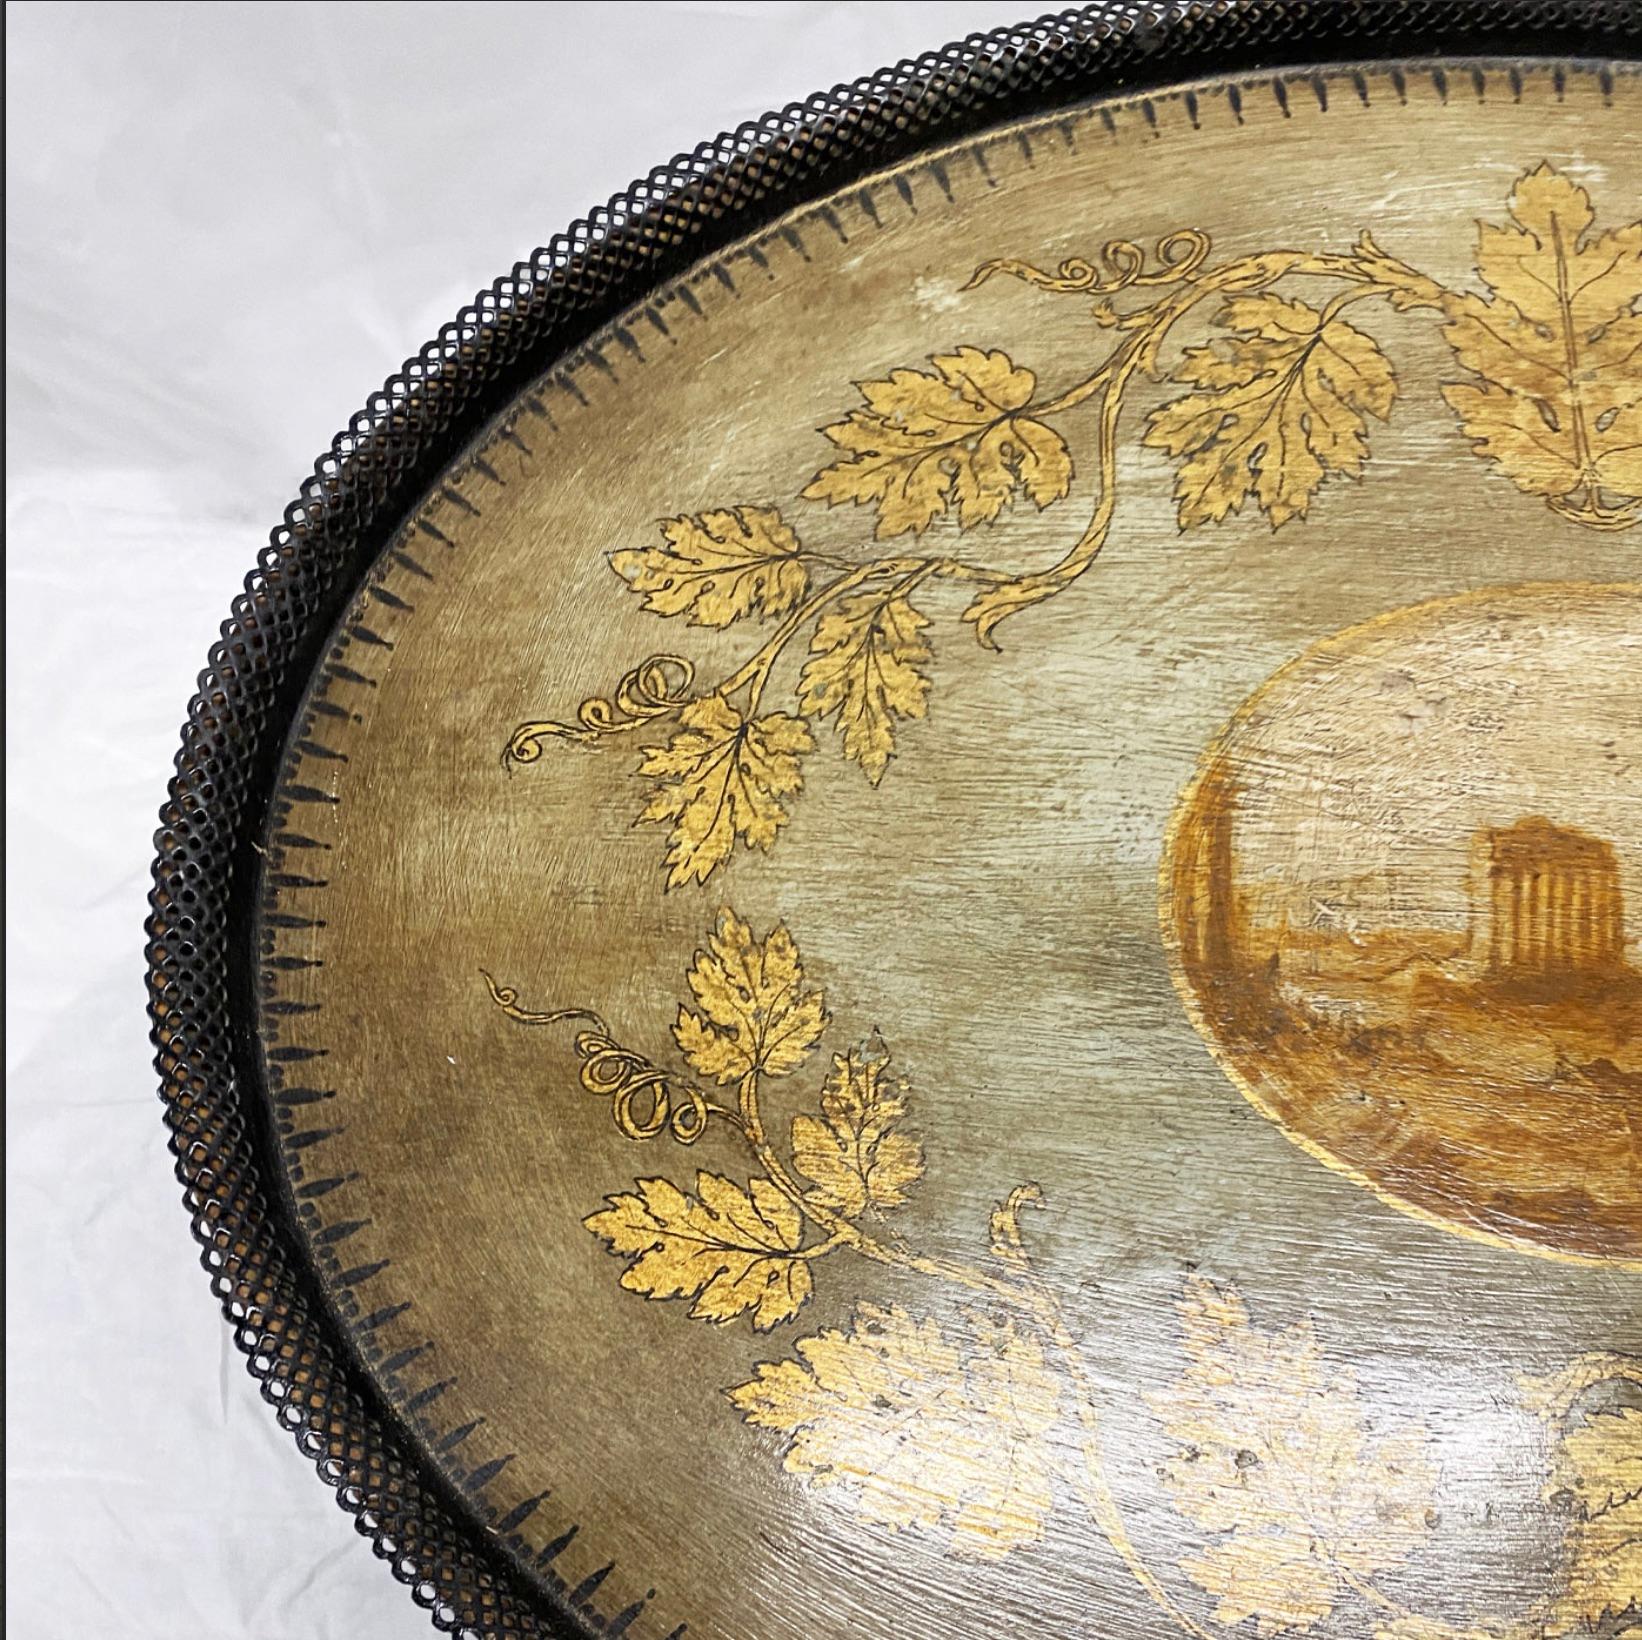 19th Century Dutch Oval Mahogany Entry Table with Charming Landscape Painted on  In Good Condition For Sale In Sag Harbor, NY